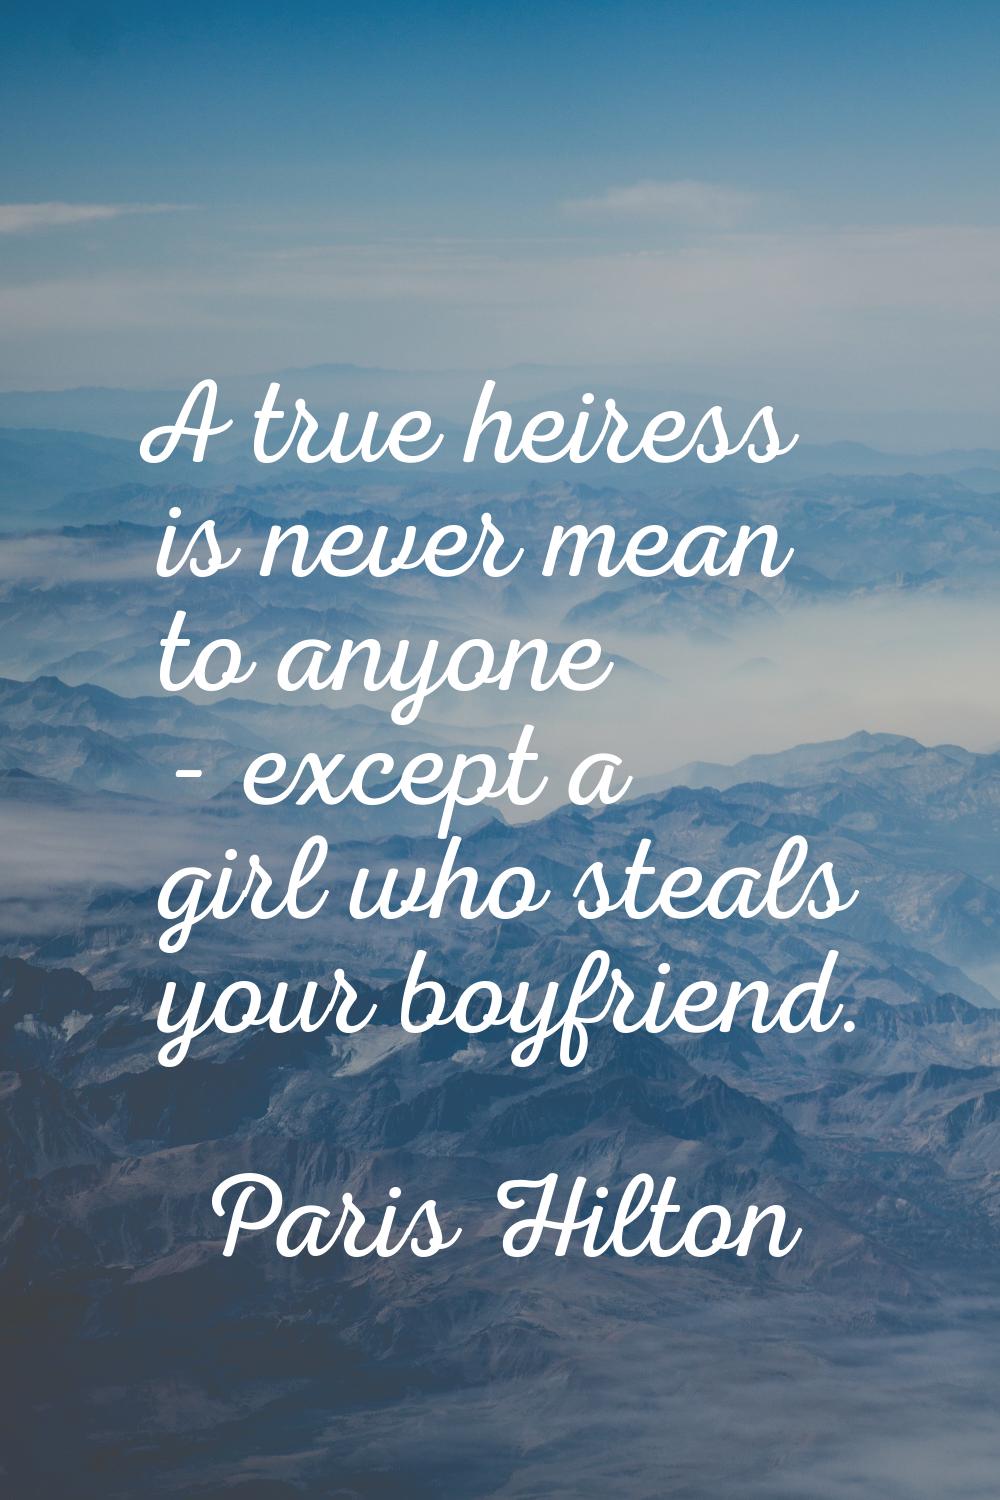 A true heiress is never mean to anyone - except a girl who steals your boyfriend.